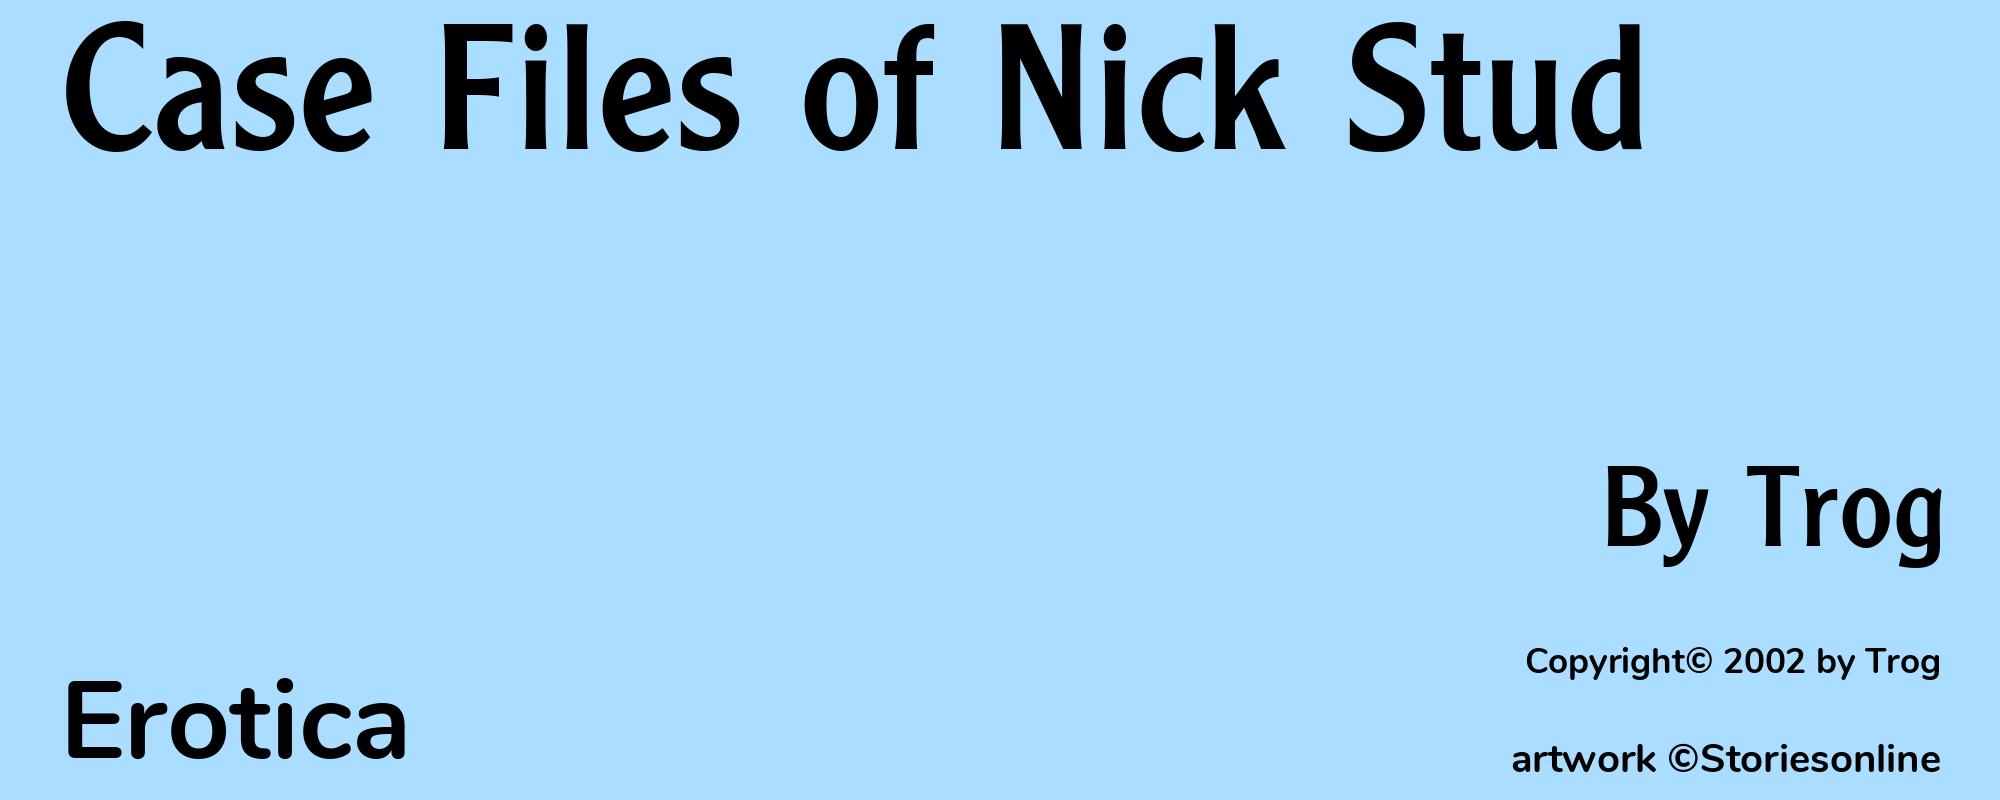 Case Files of Nick Stud - Cover